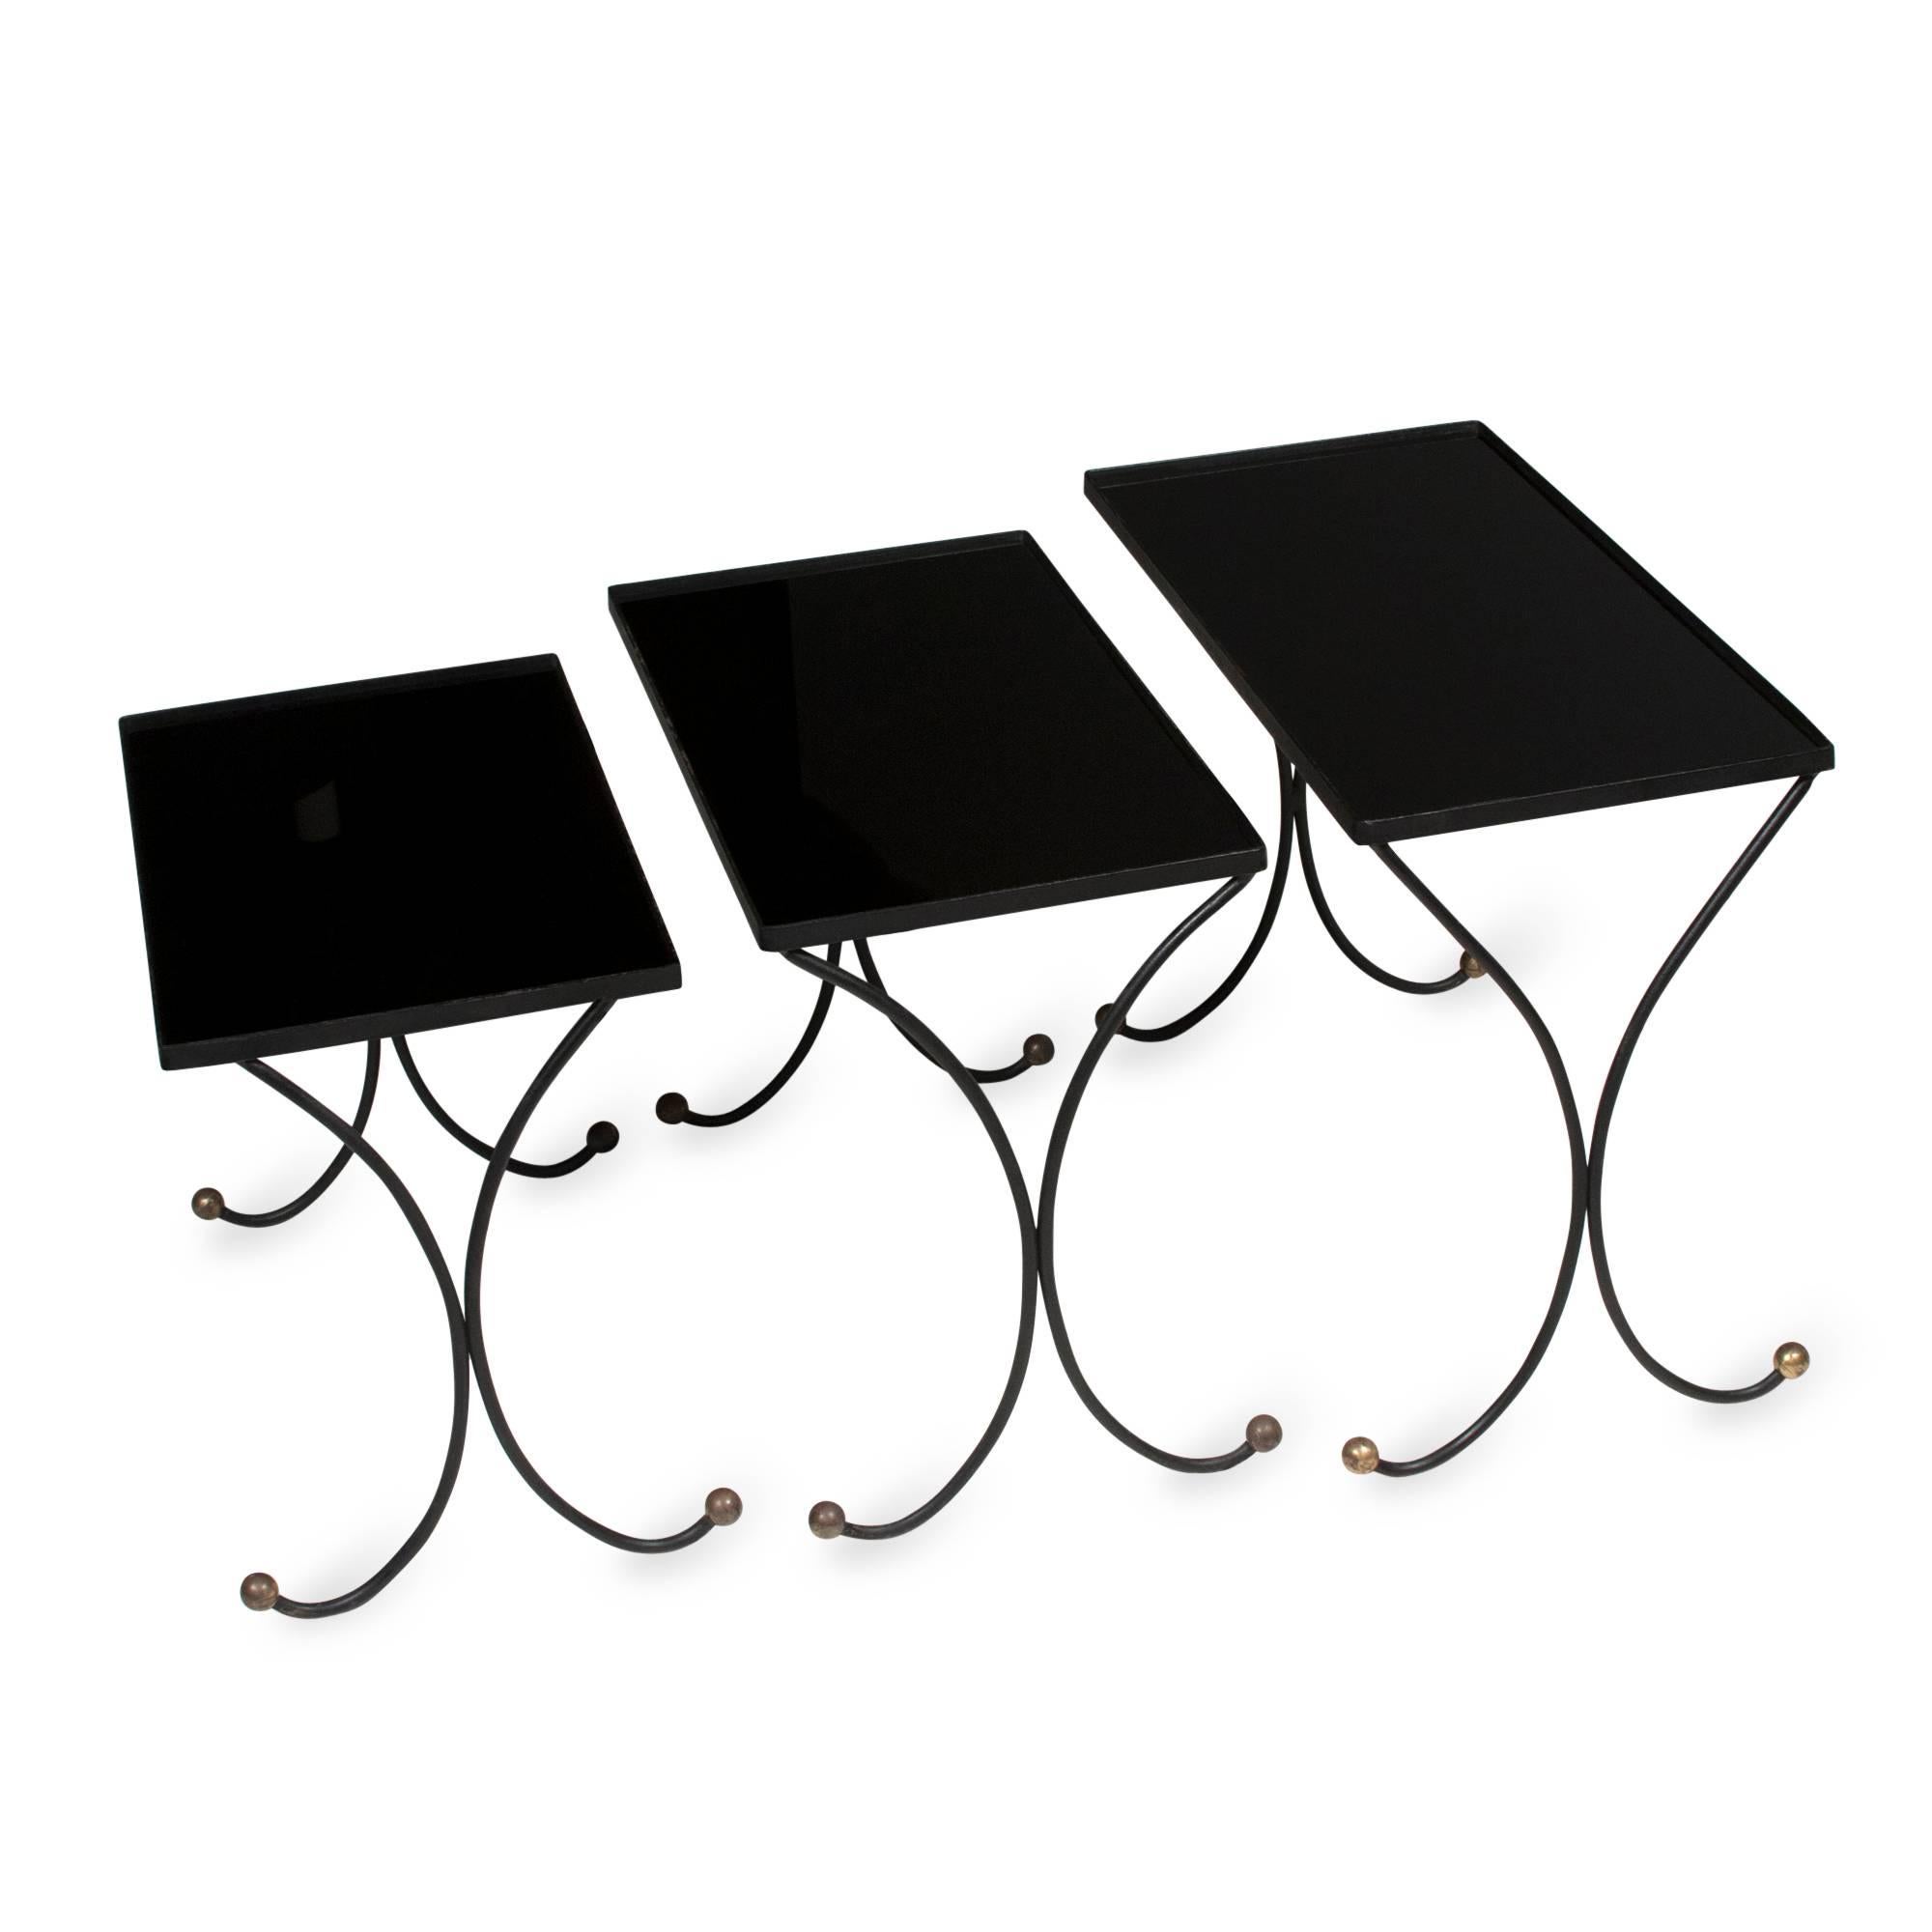 Set of three iron and black glass top nesting tables, curved legs with brass ball feet, French, 1950s, in the style of Jean Royère. The largest measures 24 x 12 in, height 18 3/4 in. (Item #2056). (sats)